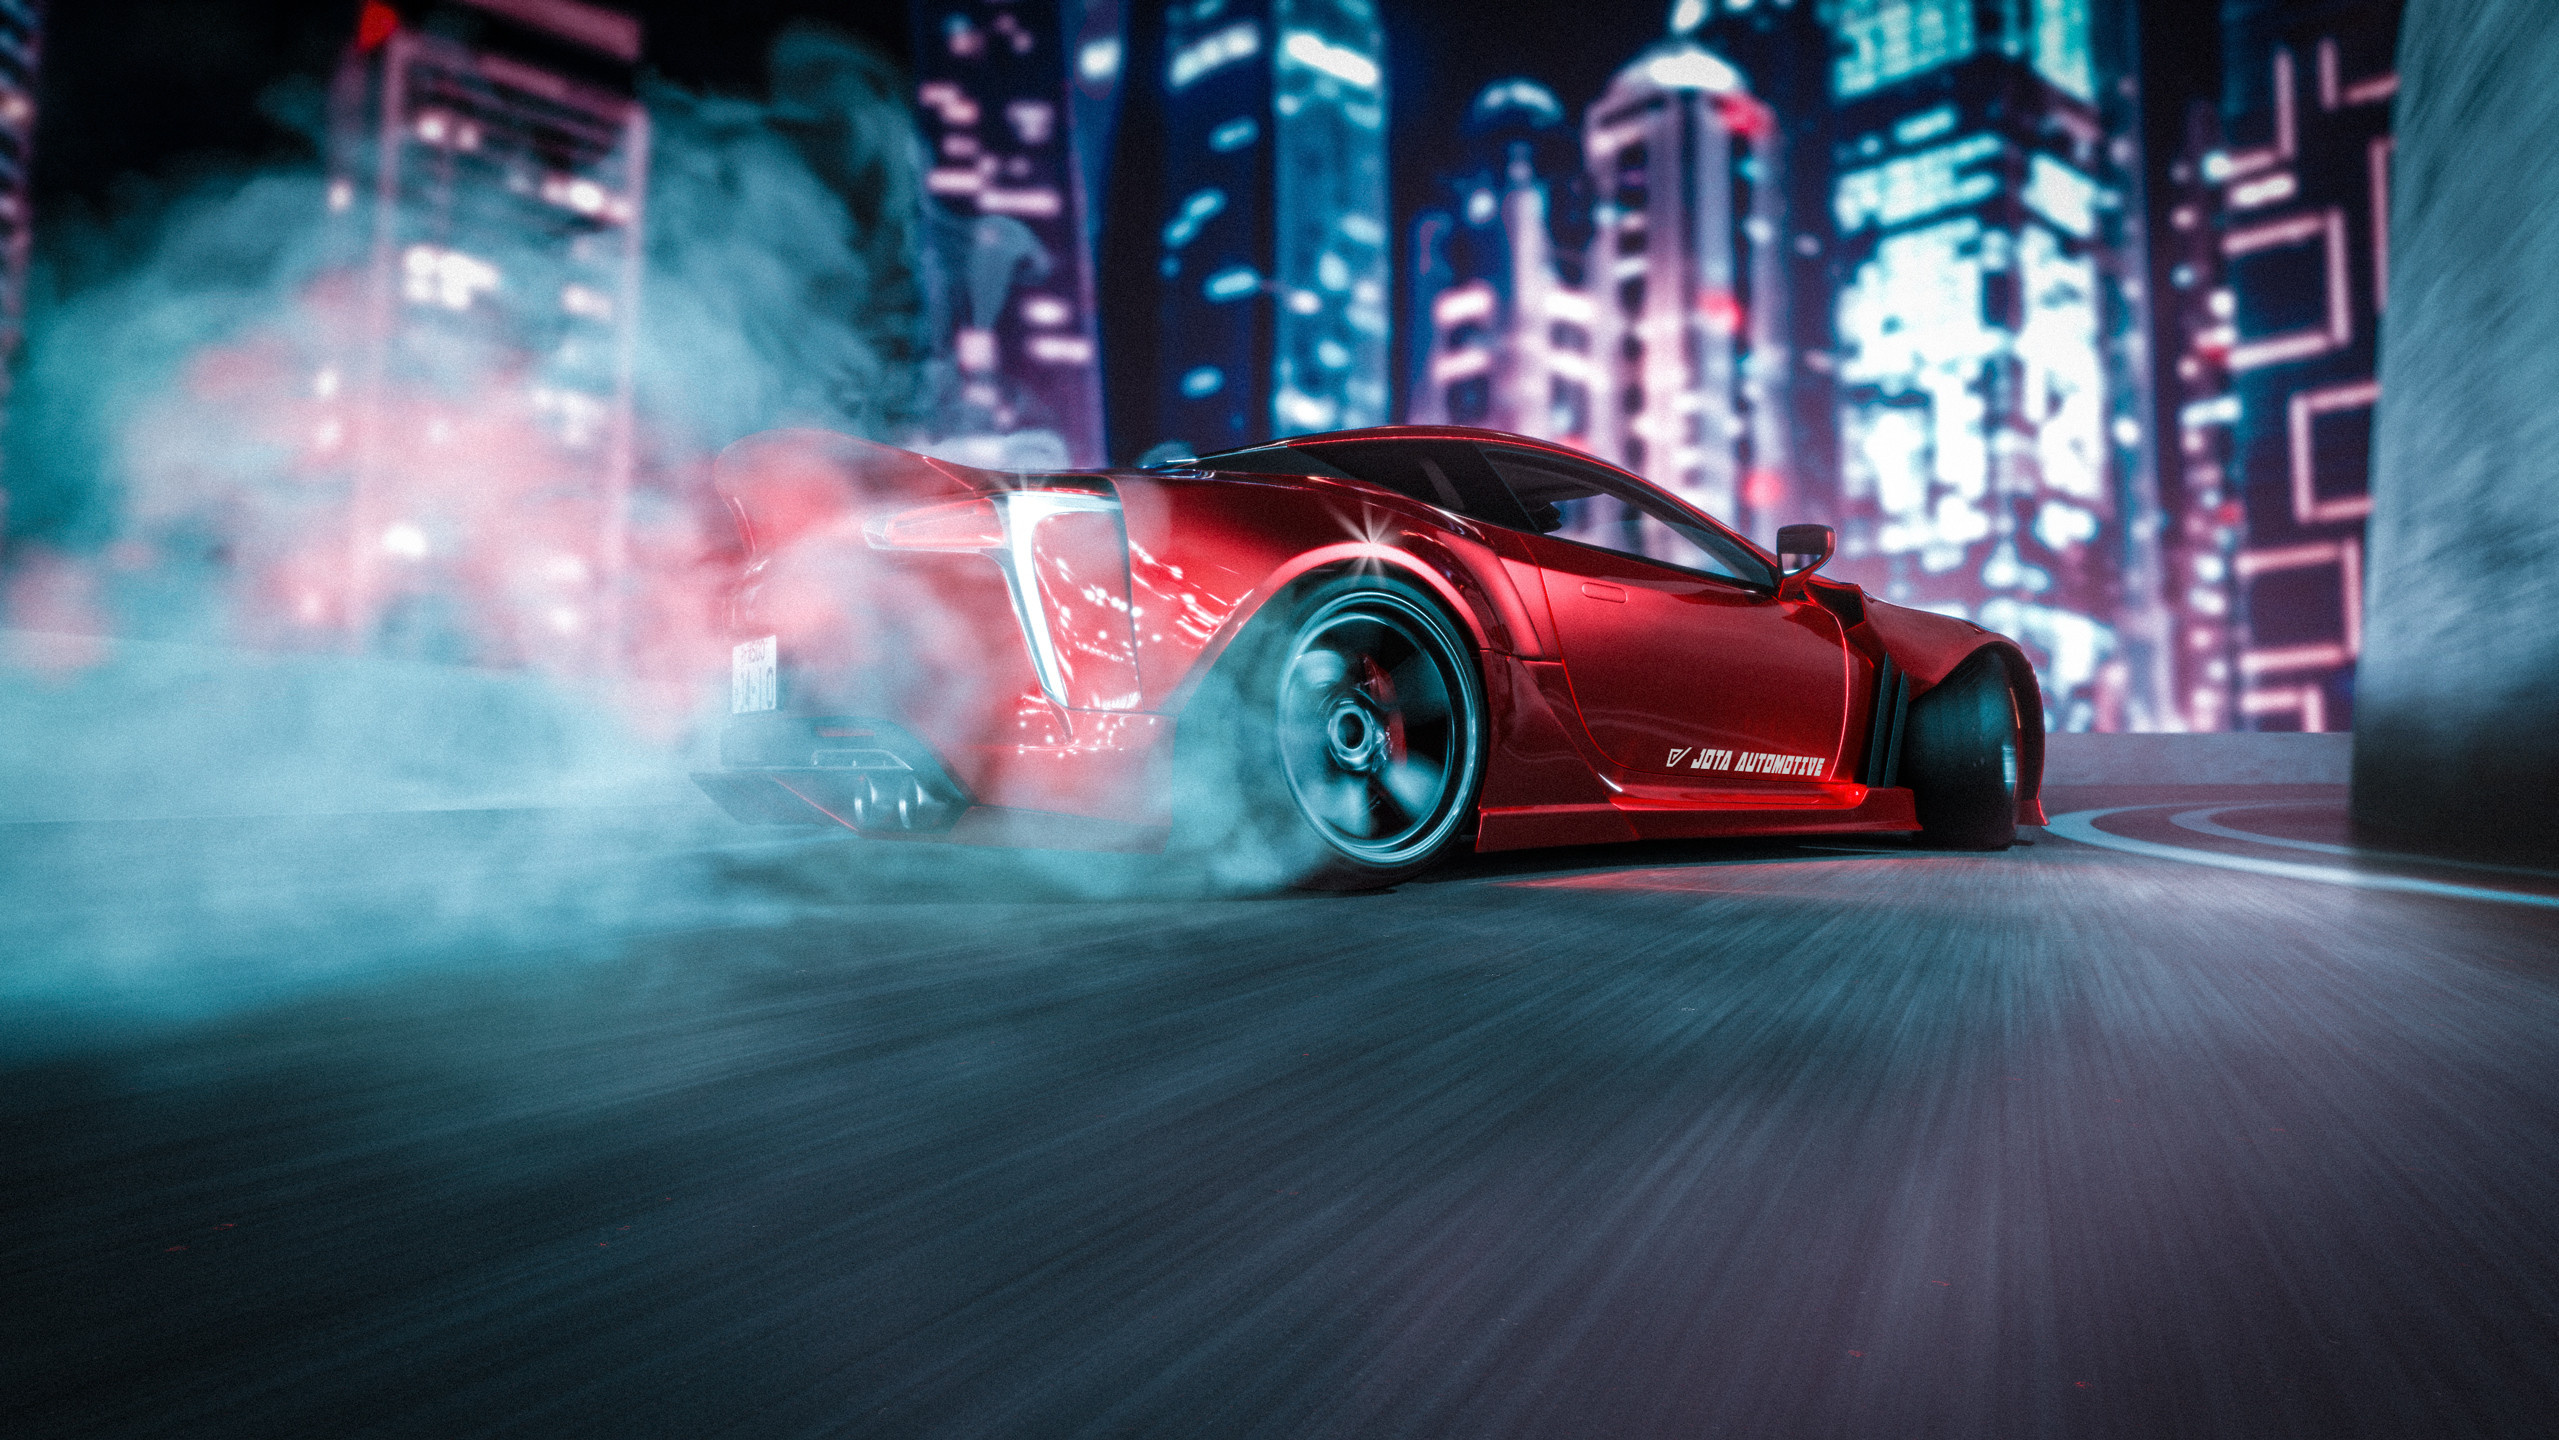 Drifting: Red Lexus LC 500, Racing in the city at night, Smoking tires. 2560x1440 HD Wallpaper.